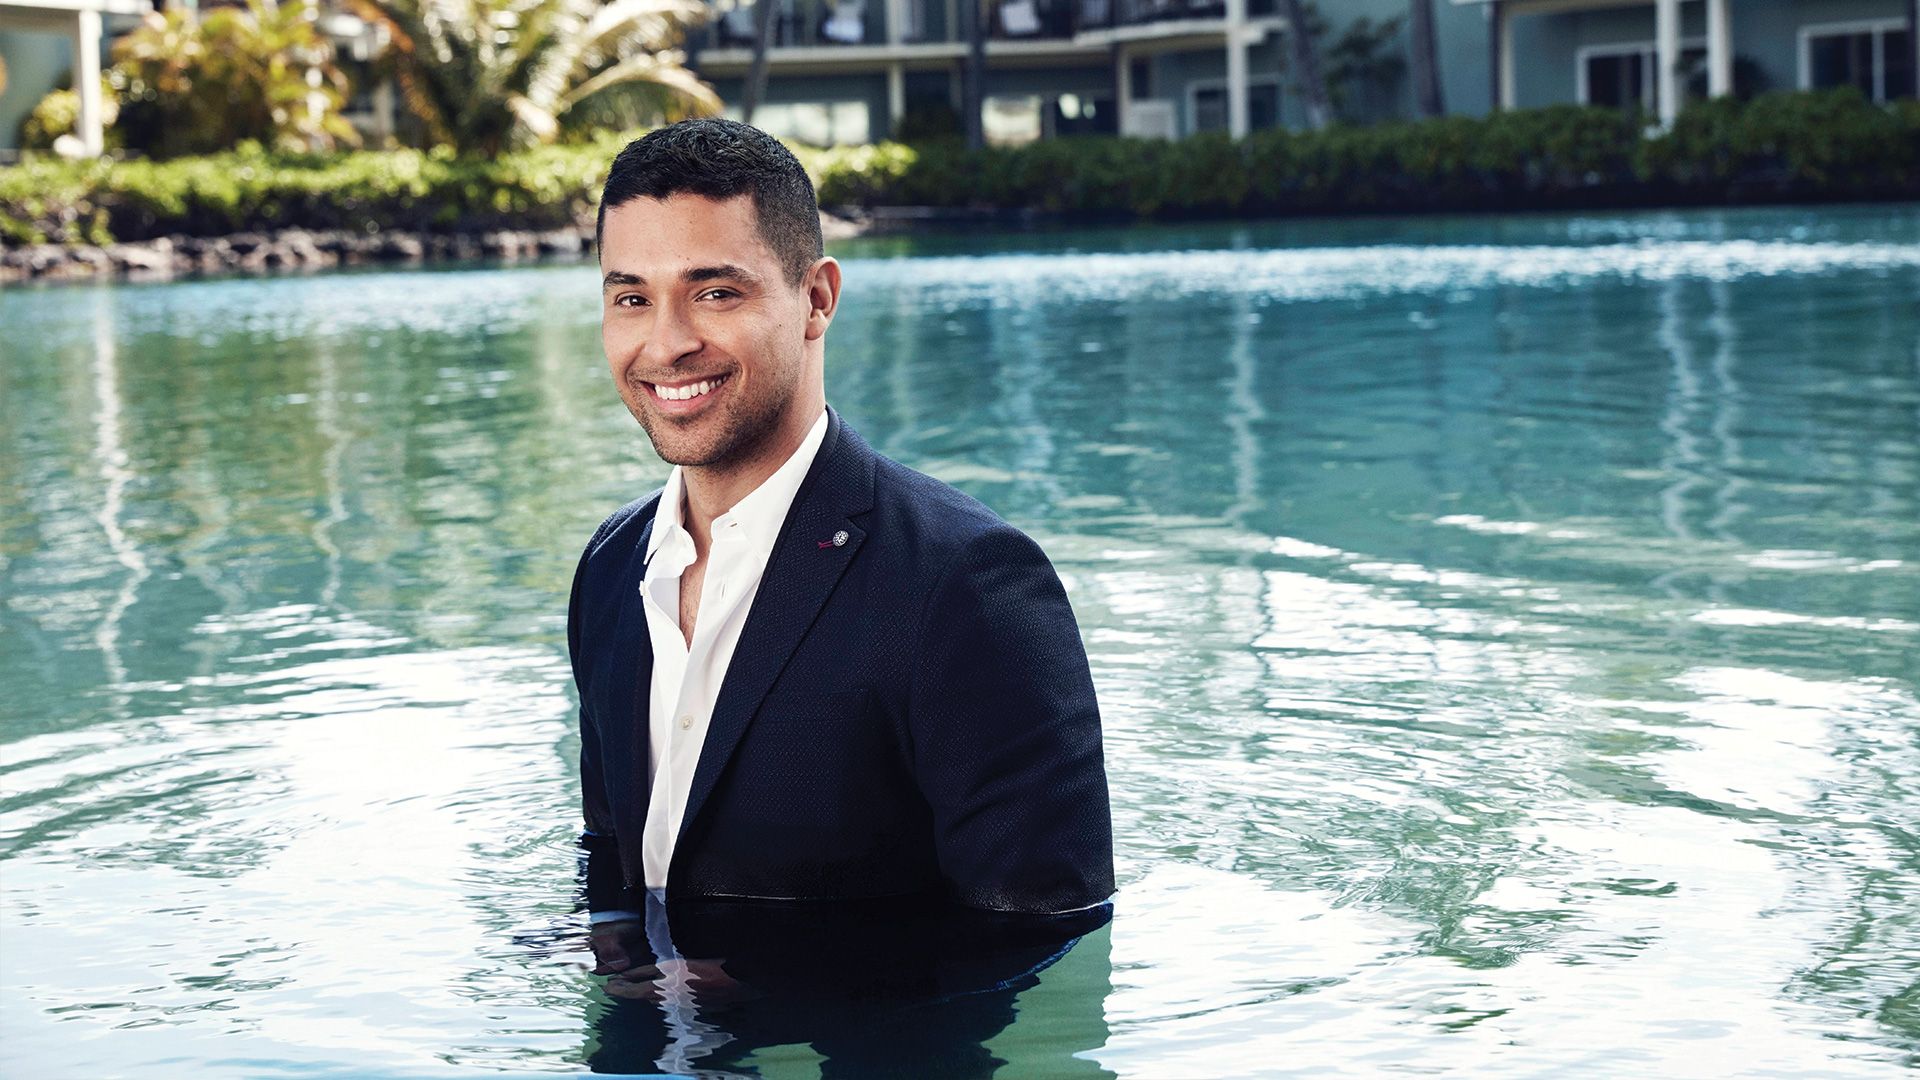 Wilmer Valderrama descends fully dressed in a jacket and shirt into a swimming pool.